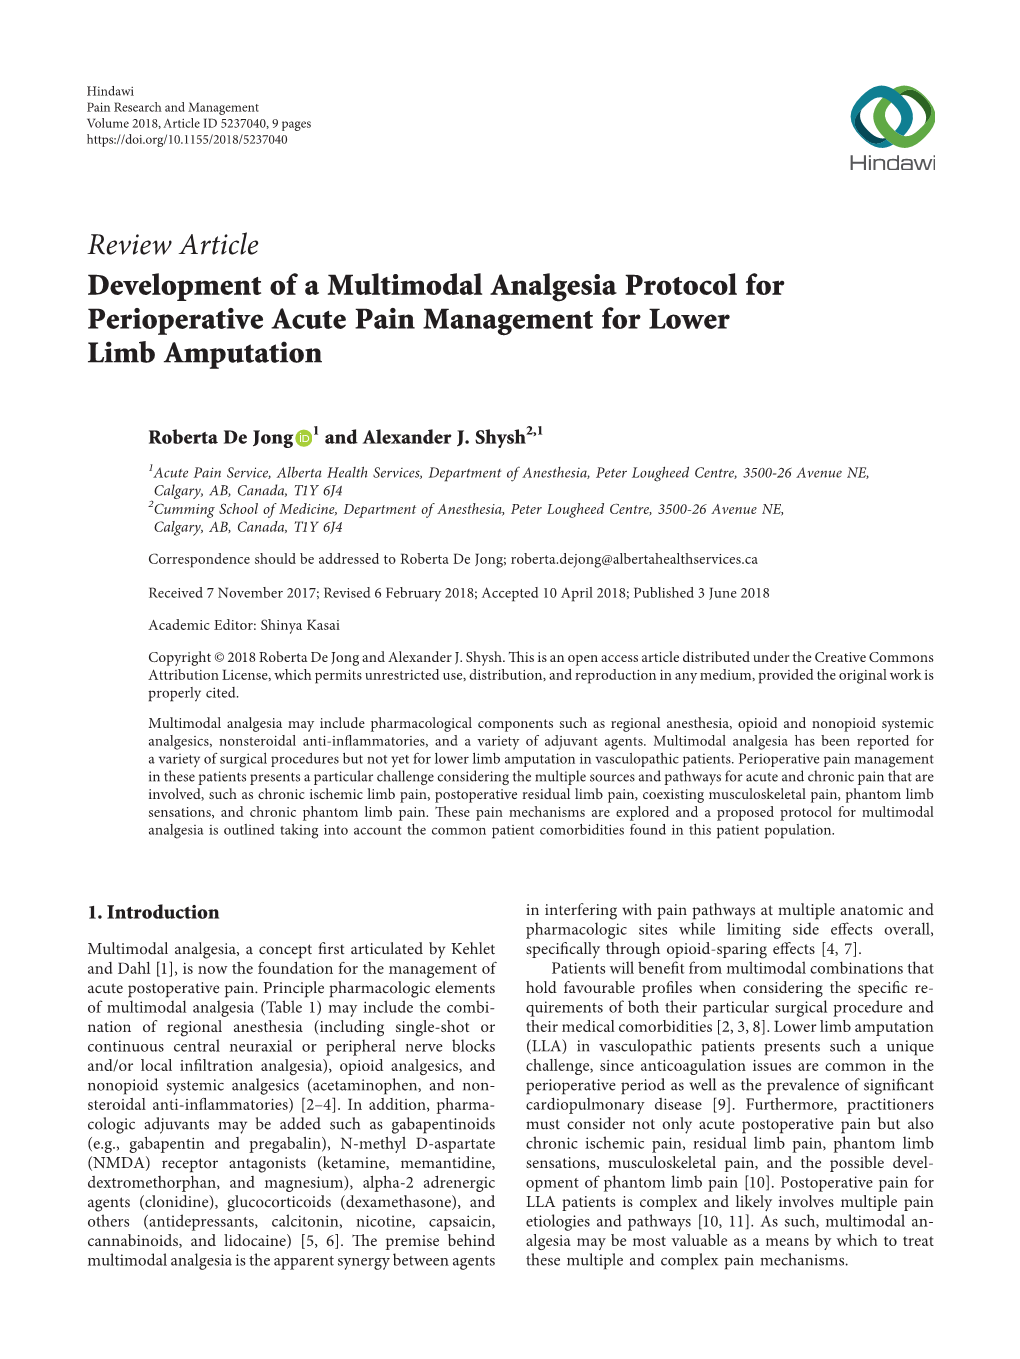 Review Article Development of a Multimodal Analgesia Protocol for Perioperative Acute Pain Management for Lower Limb Amputation